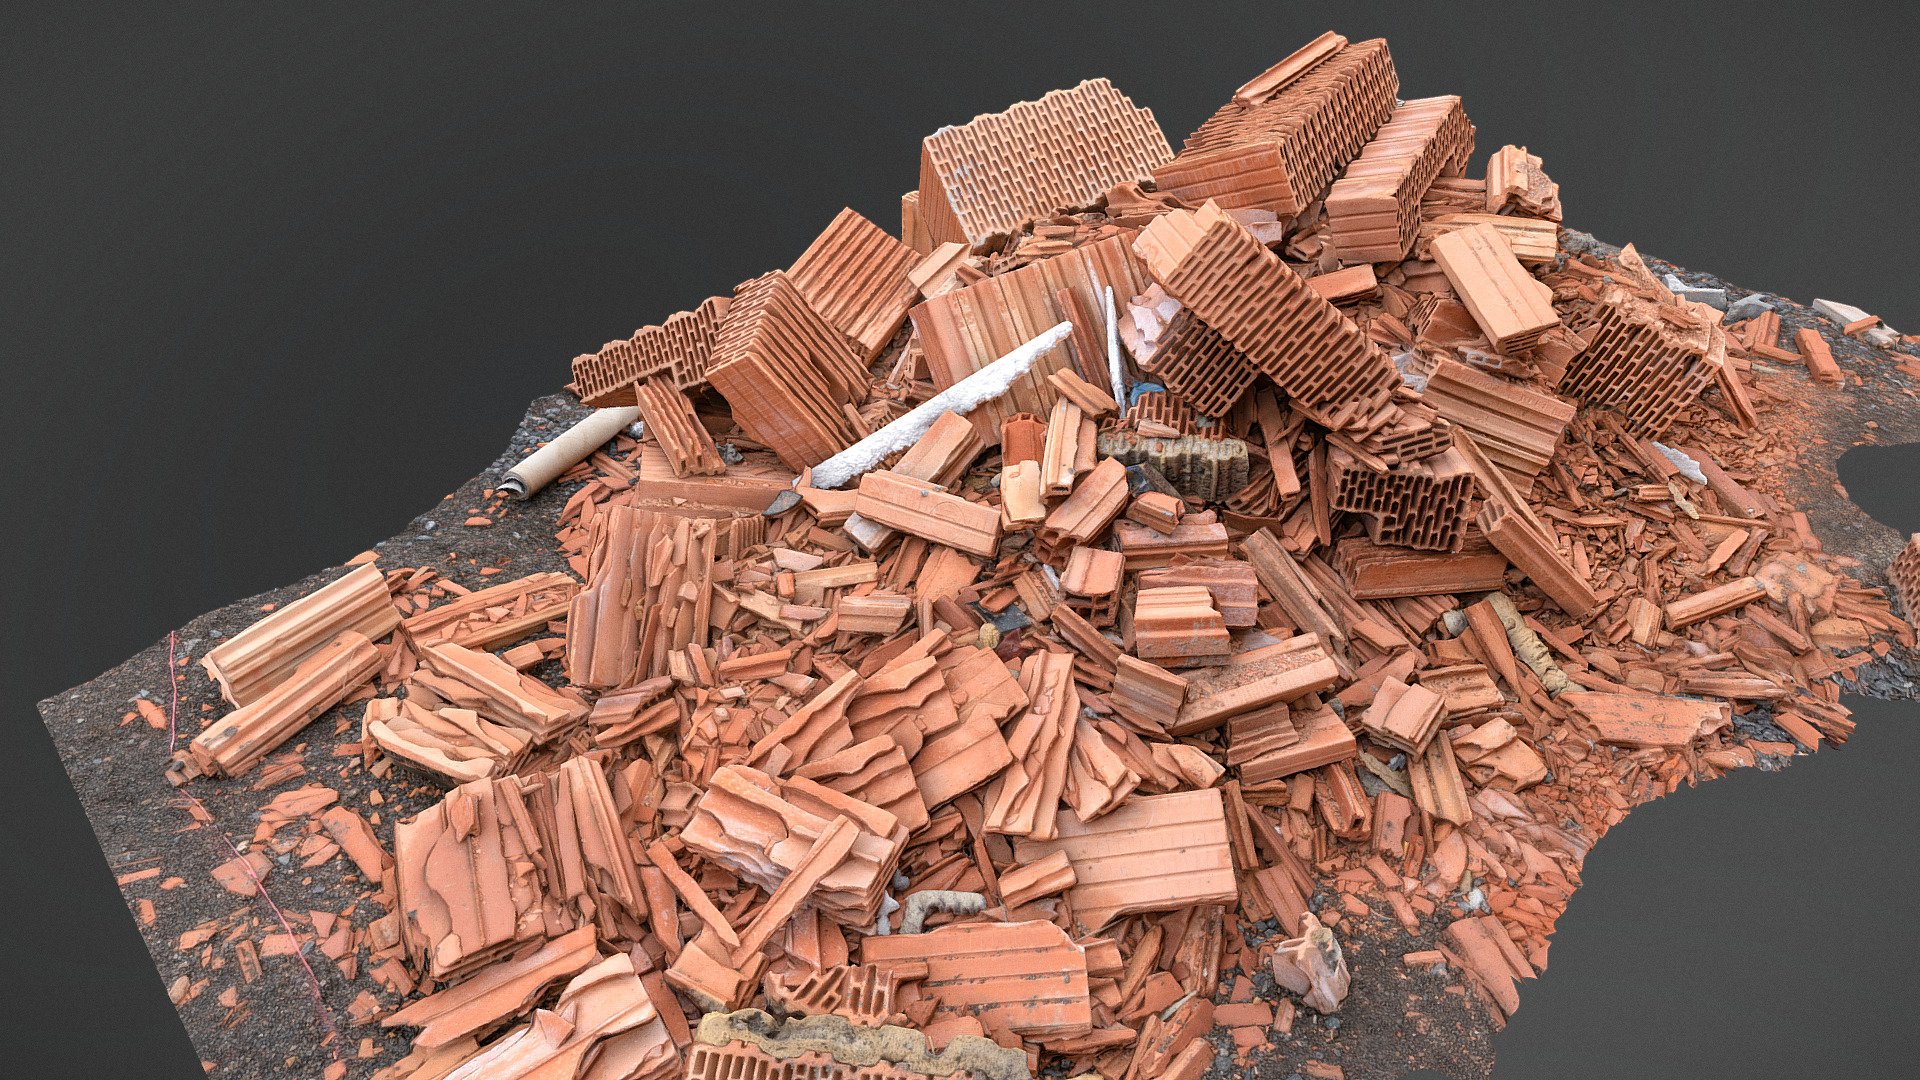 Crushed broken waste modern building perforated thermo bricks on gravel ground construction site

photogrammetry scan (150x36mp), 4x8k textures + hd normals - Broken thermo bricks - Buy Royalty Free 3D model by matousekfoto 3d model